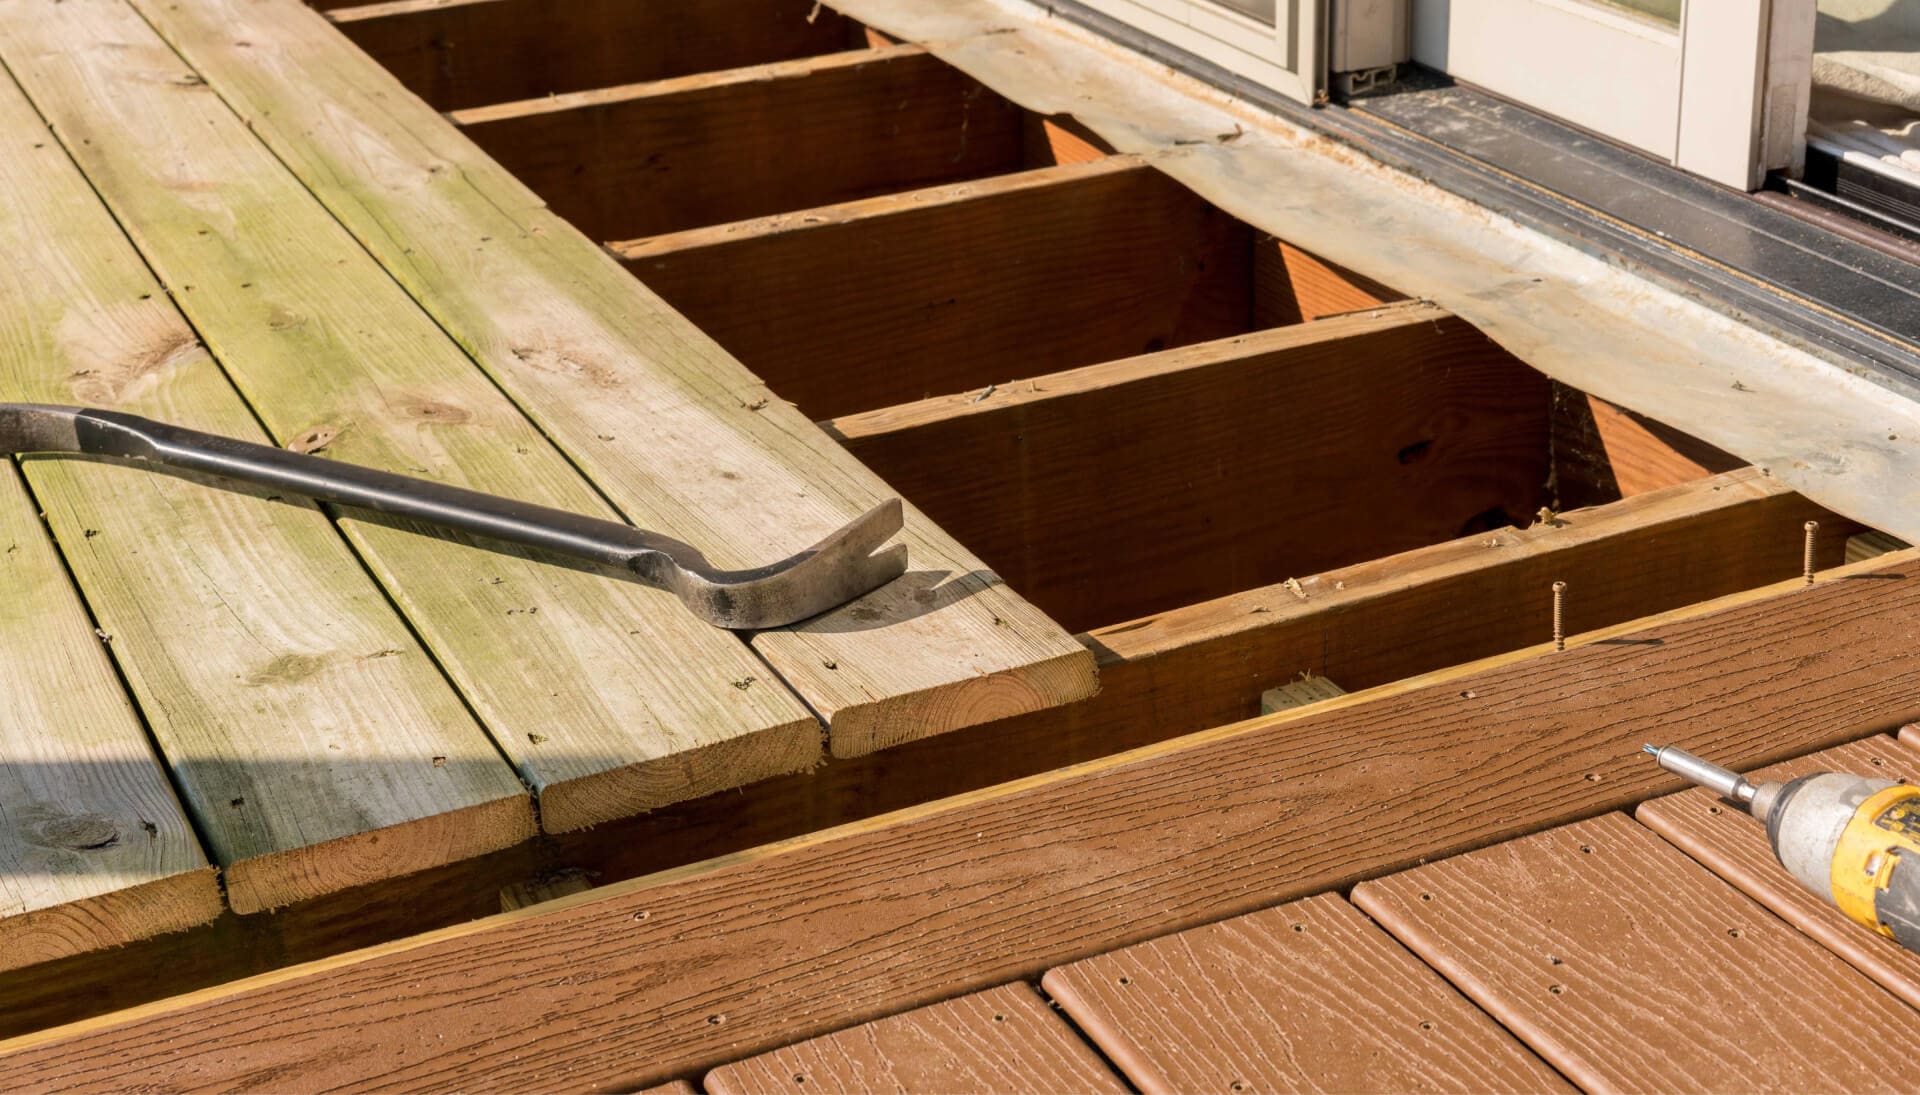 We offer the best deck repair services in Omaha, NE